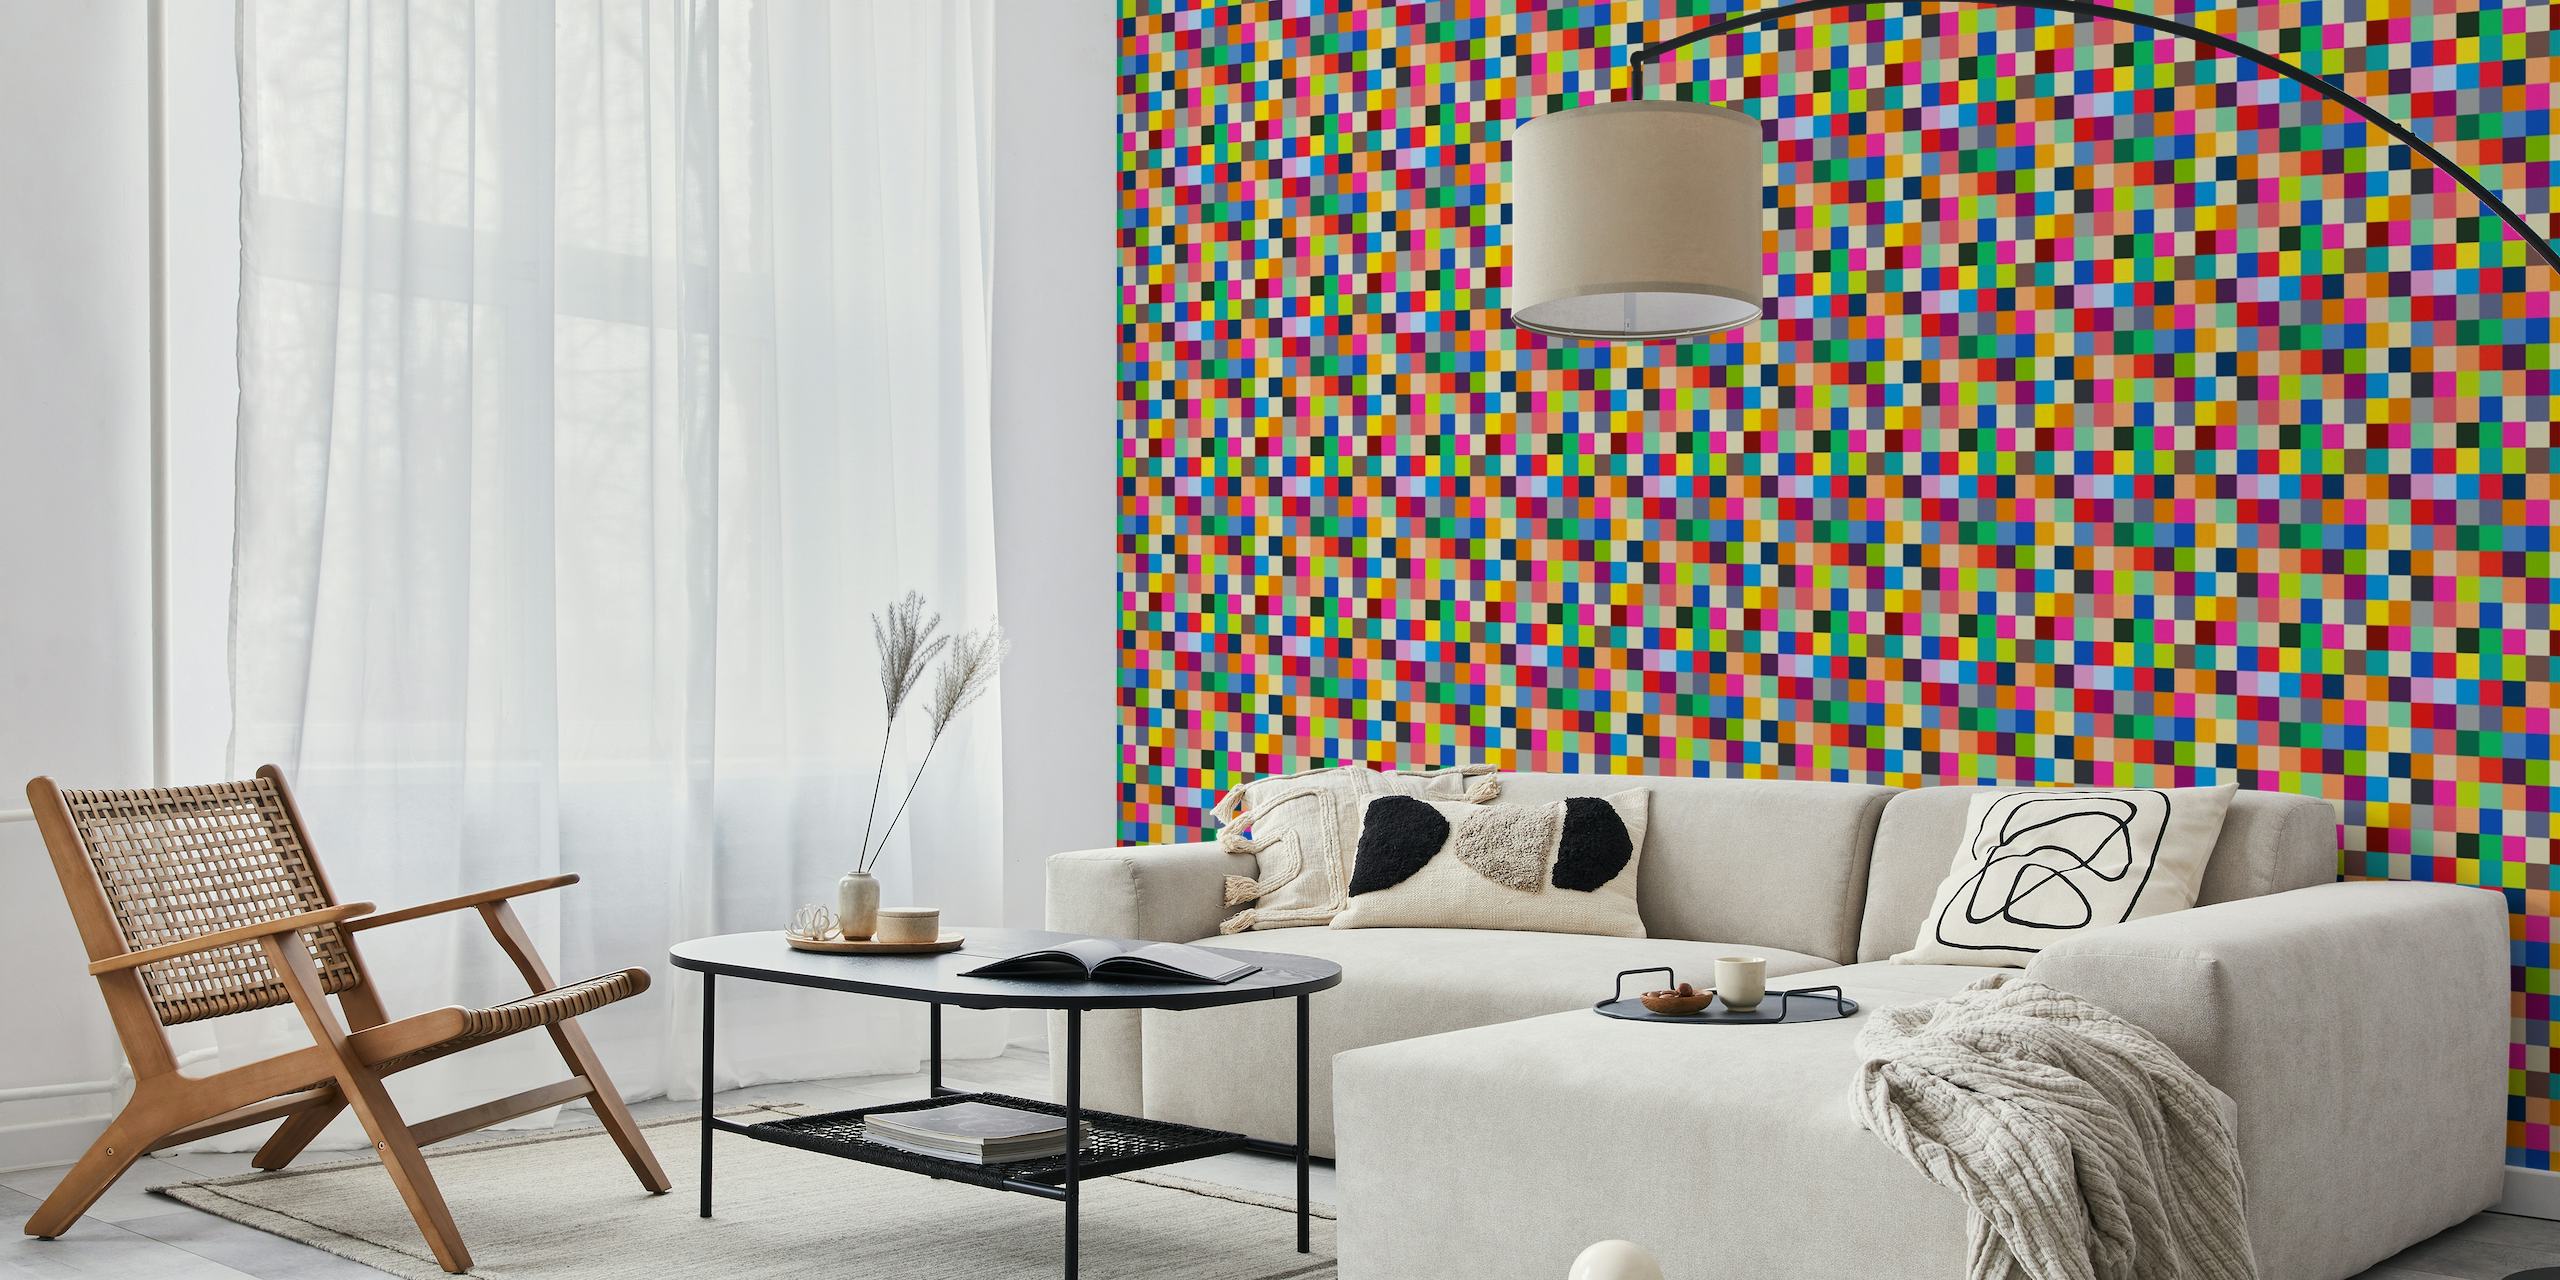 Vibrant geometric mosaic wall mural with a colorful pattern